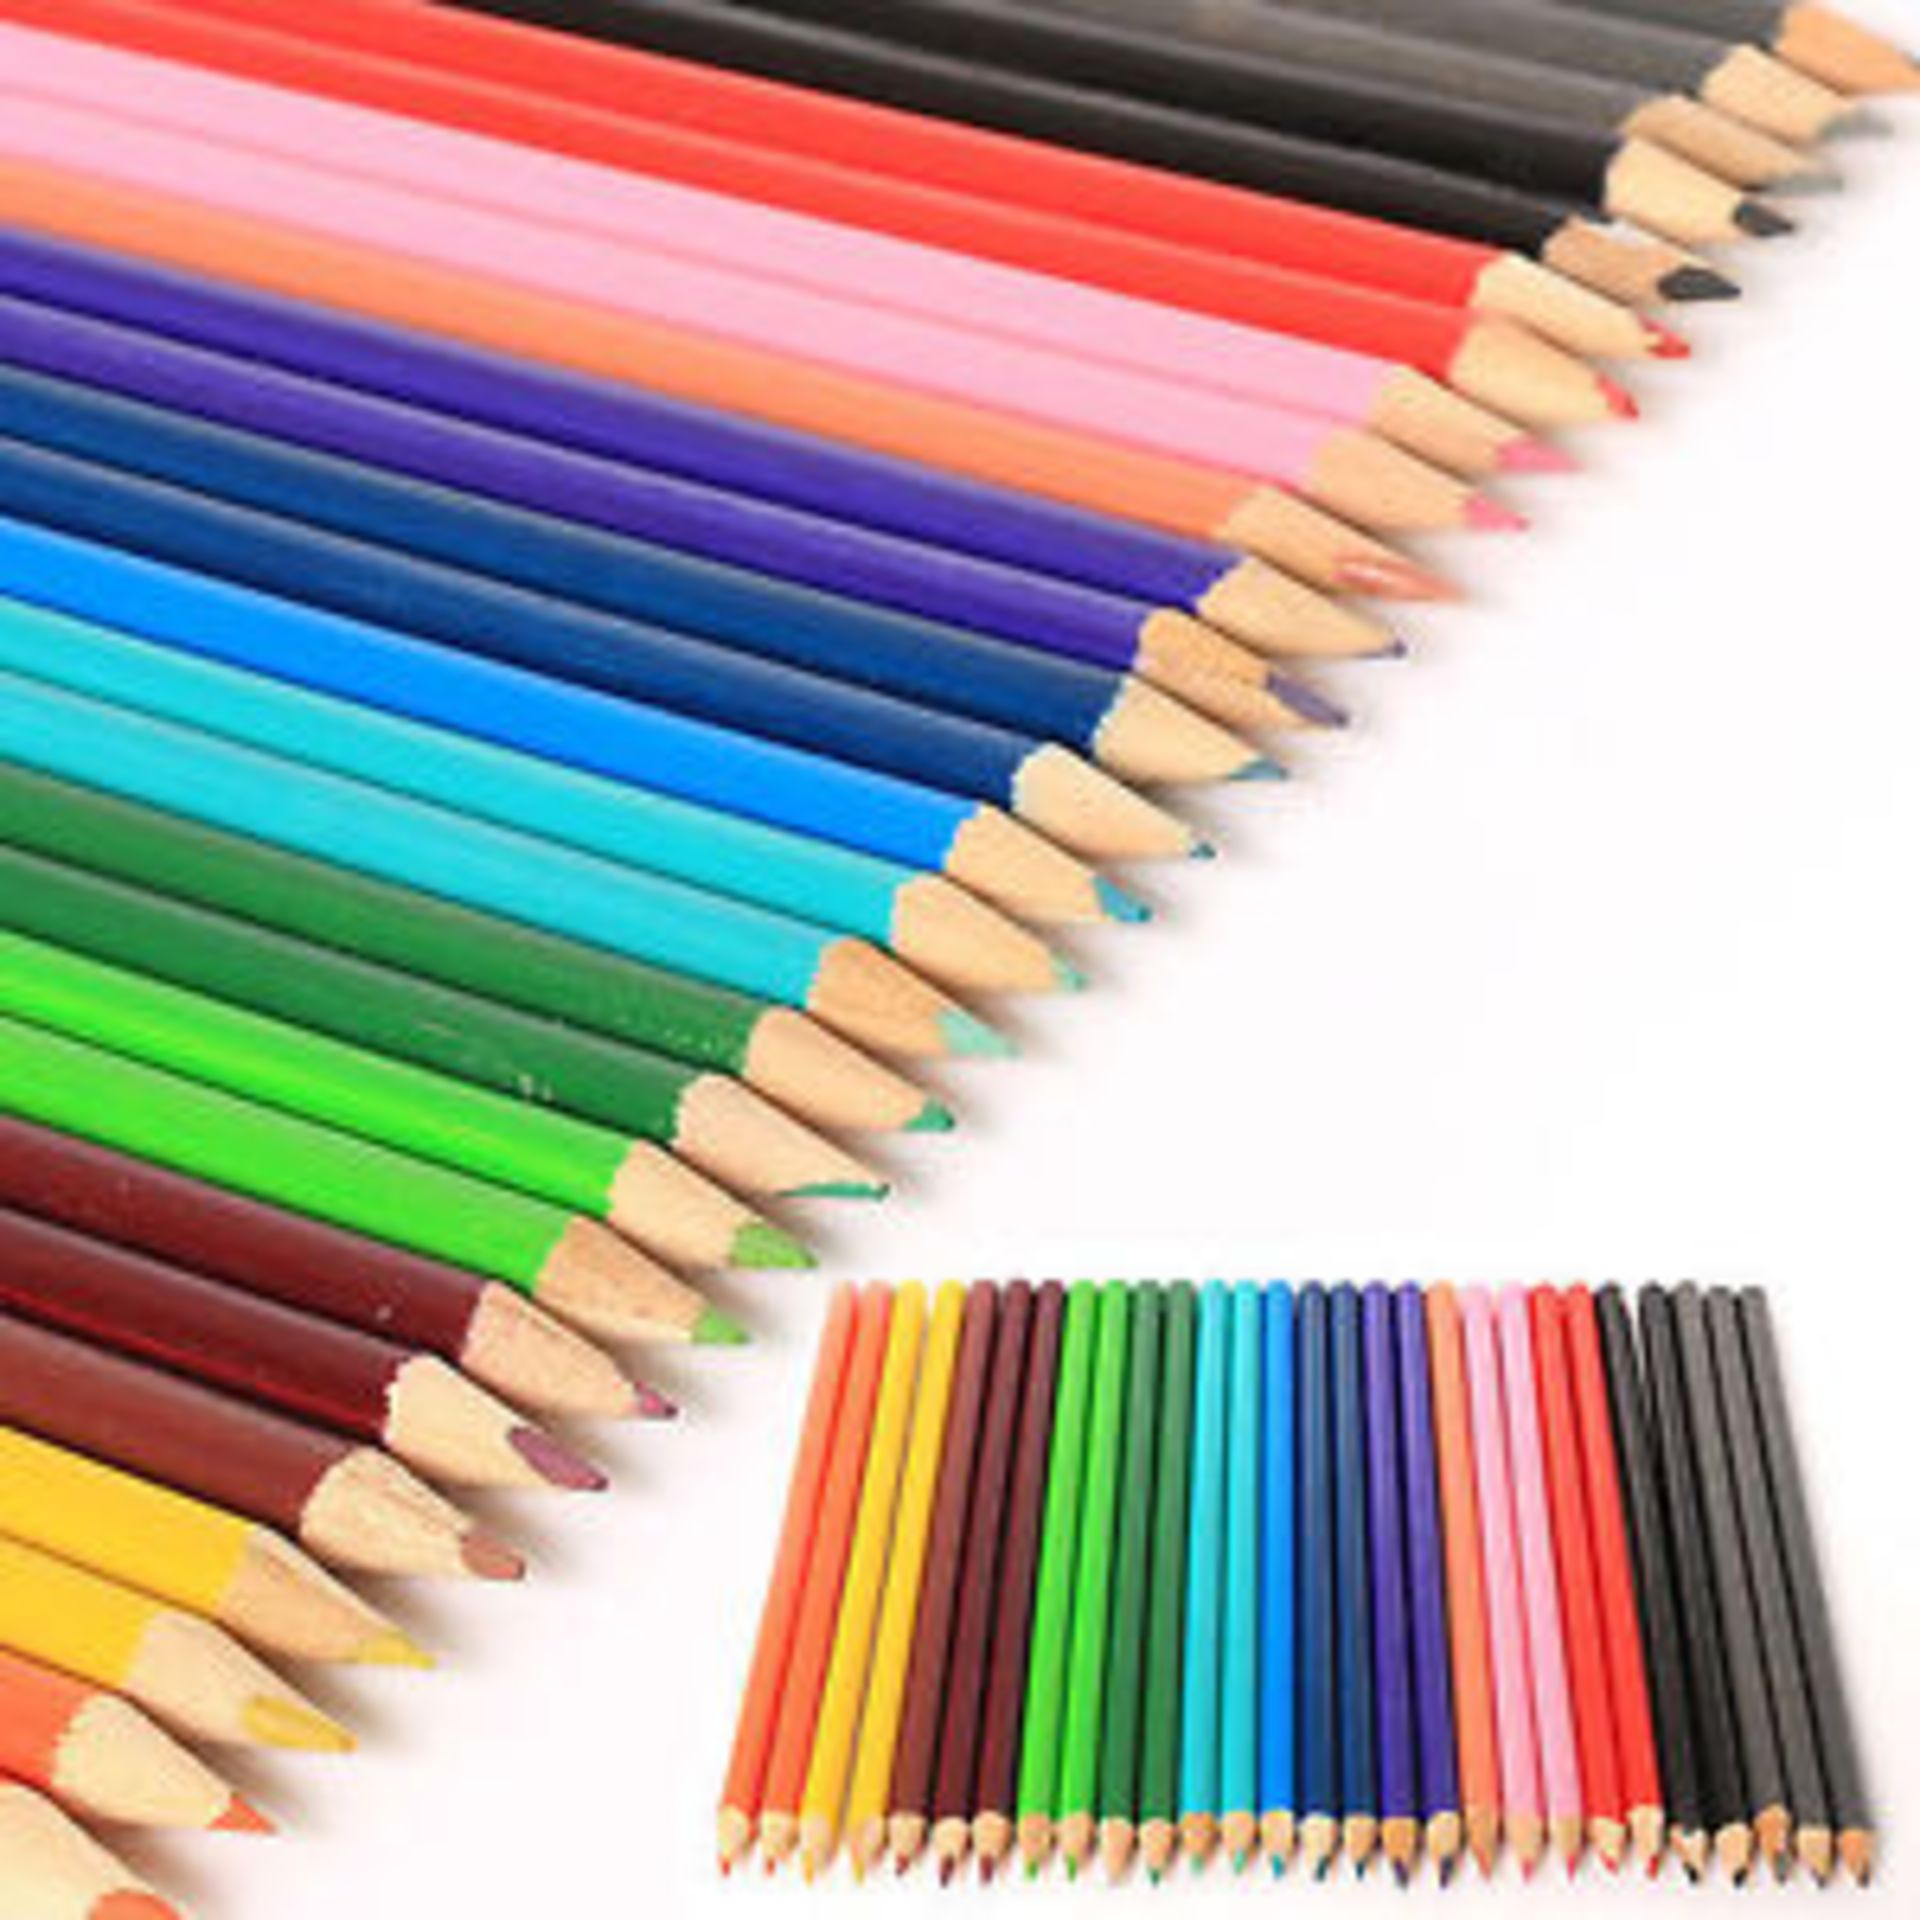 V Brand New 30 Pack Professional Colouring Pencils - Artist Quality - Image 2 of 2